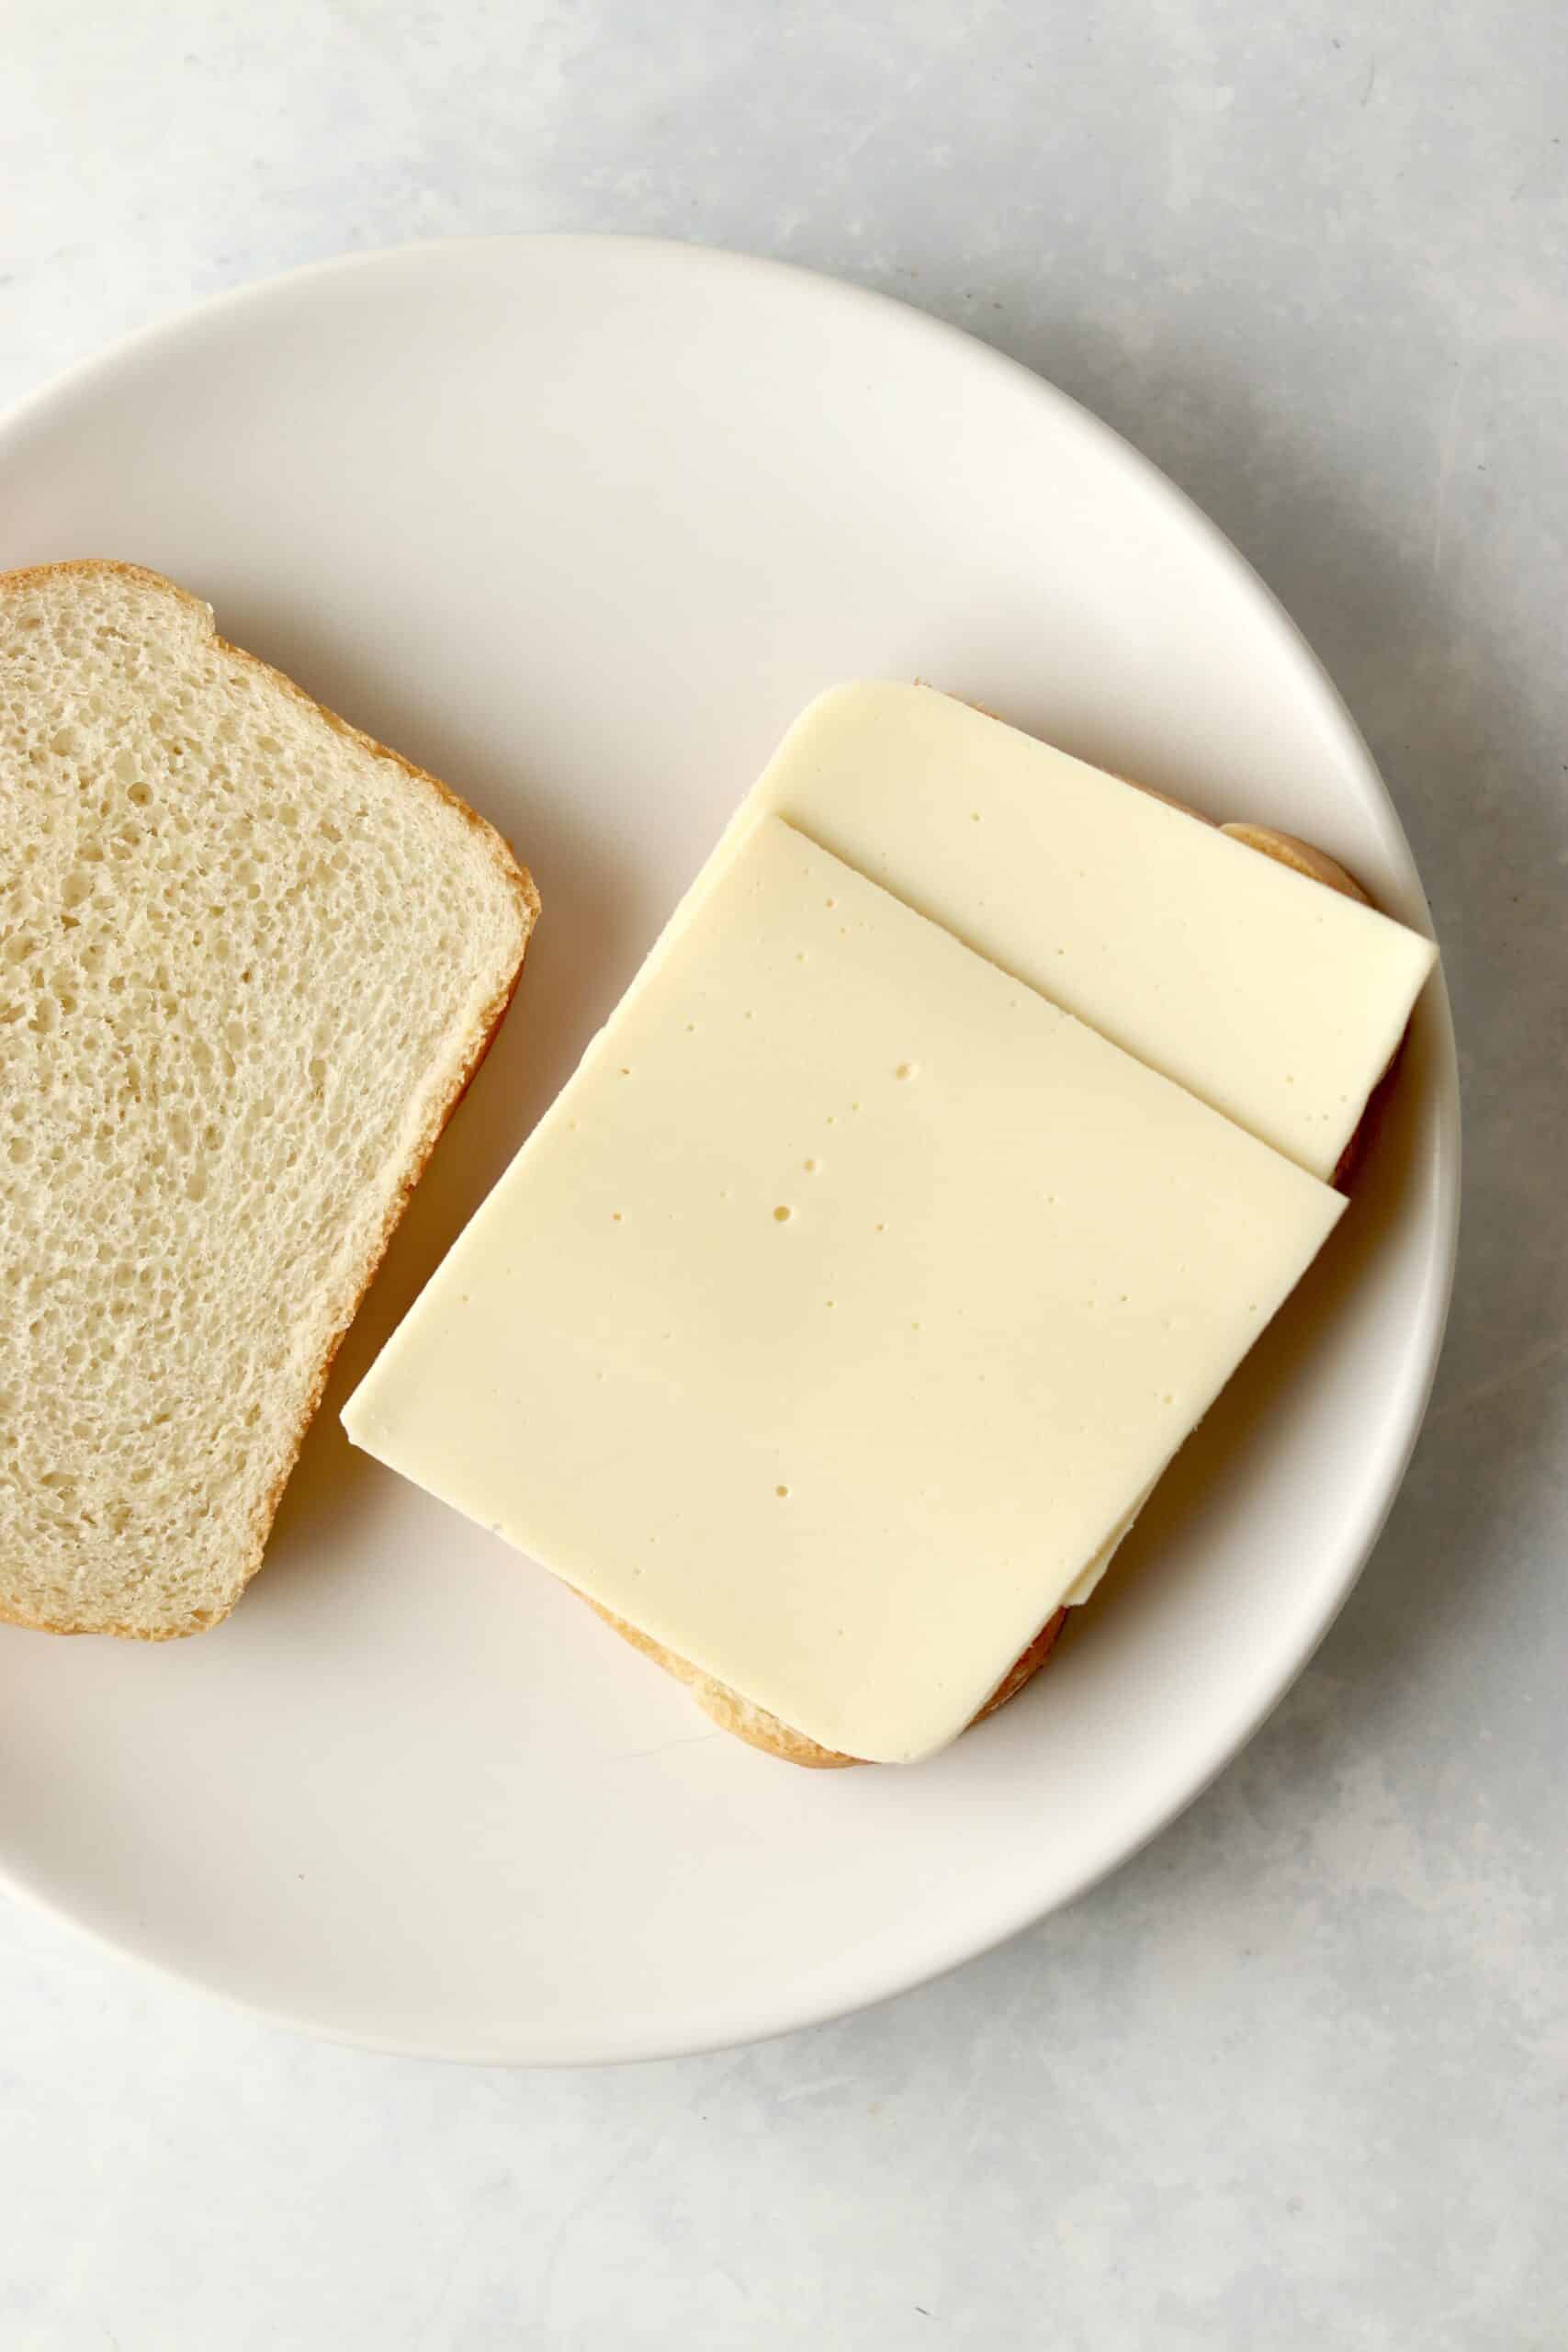 sliced white American cheese on bread.